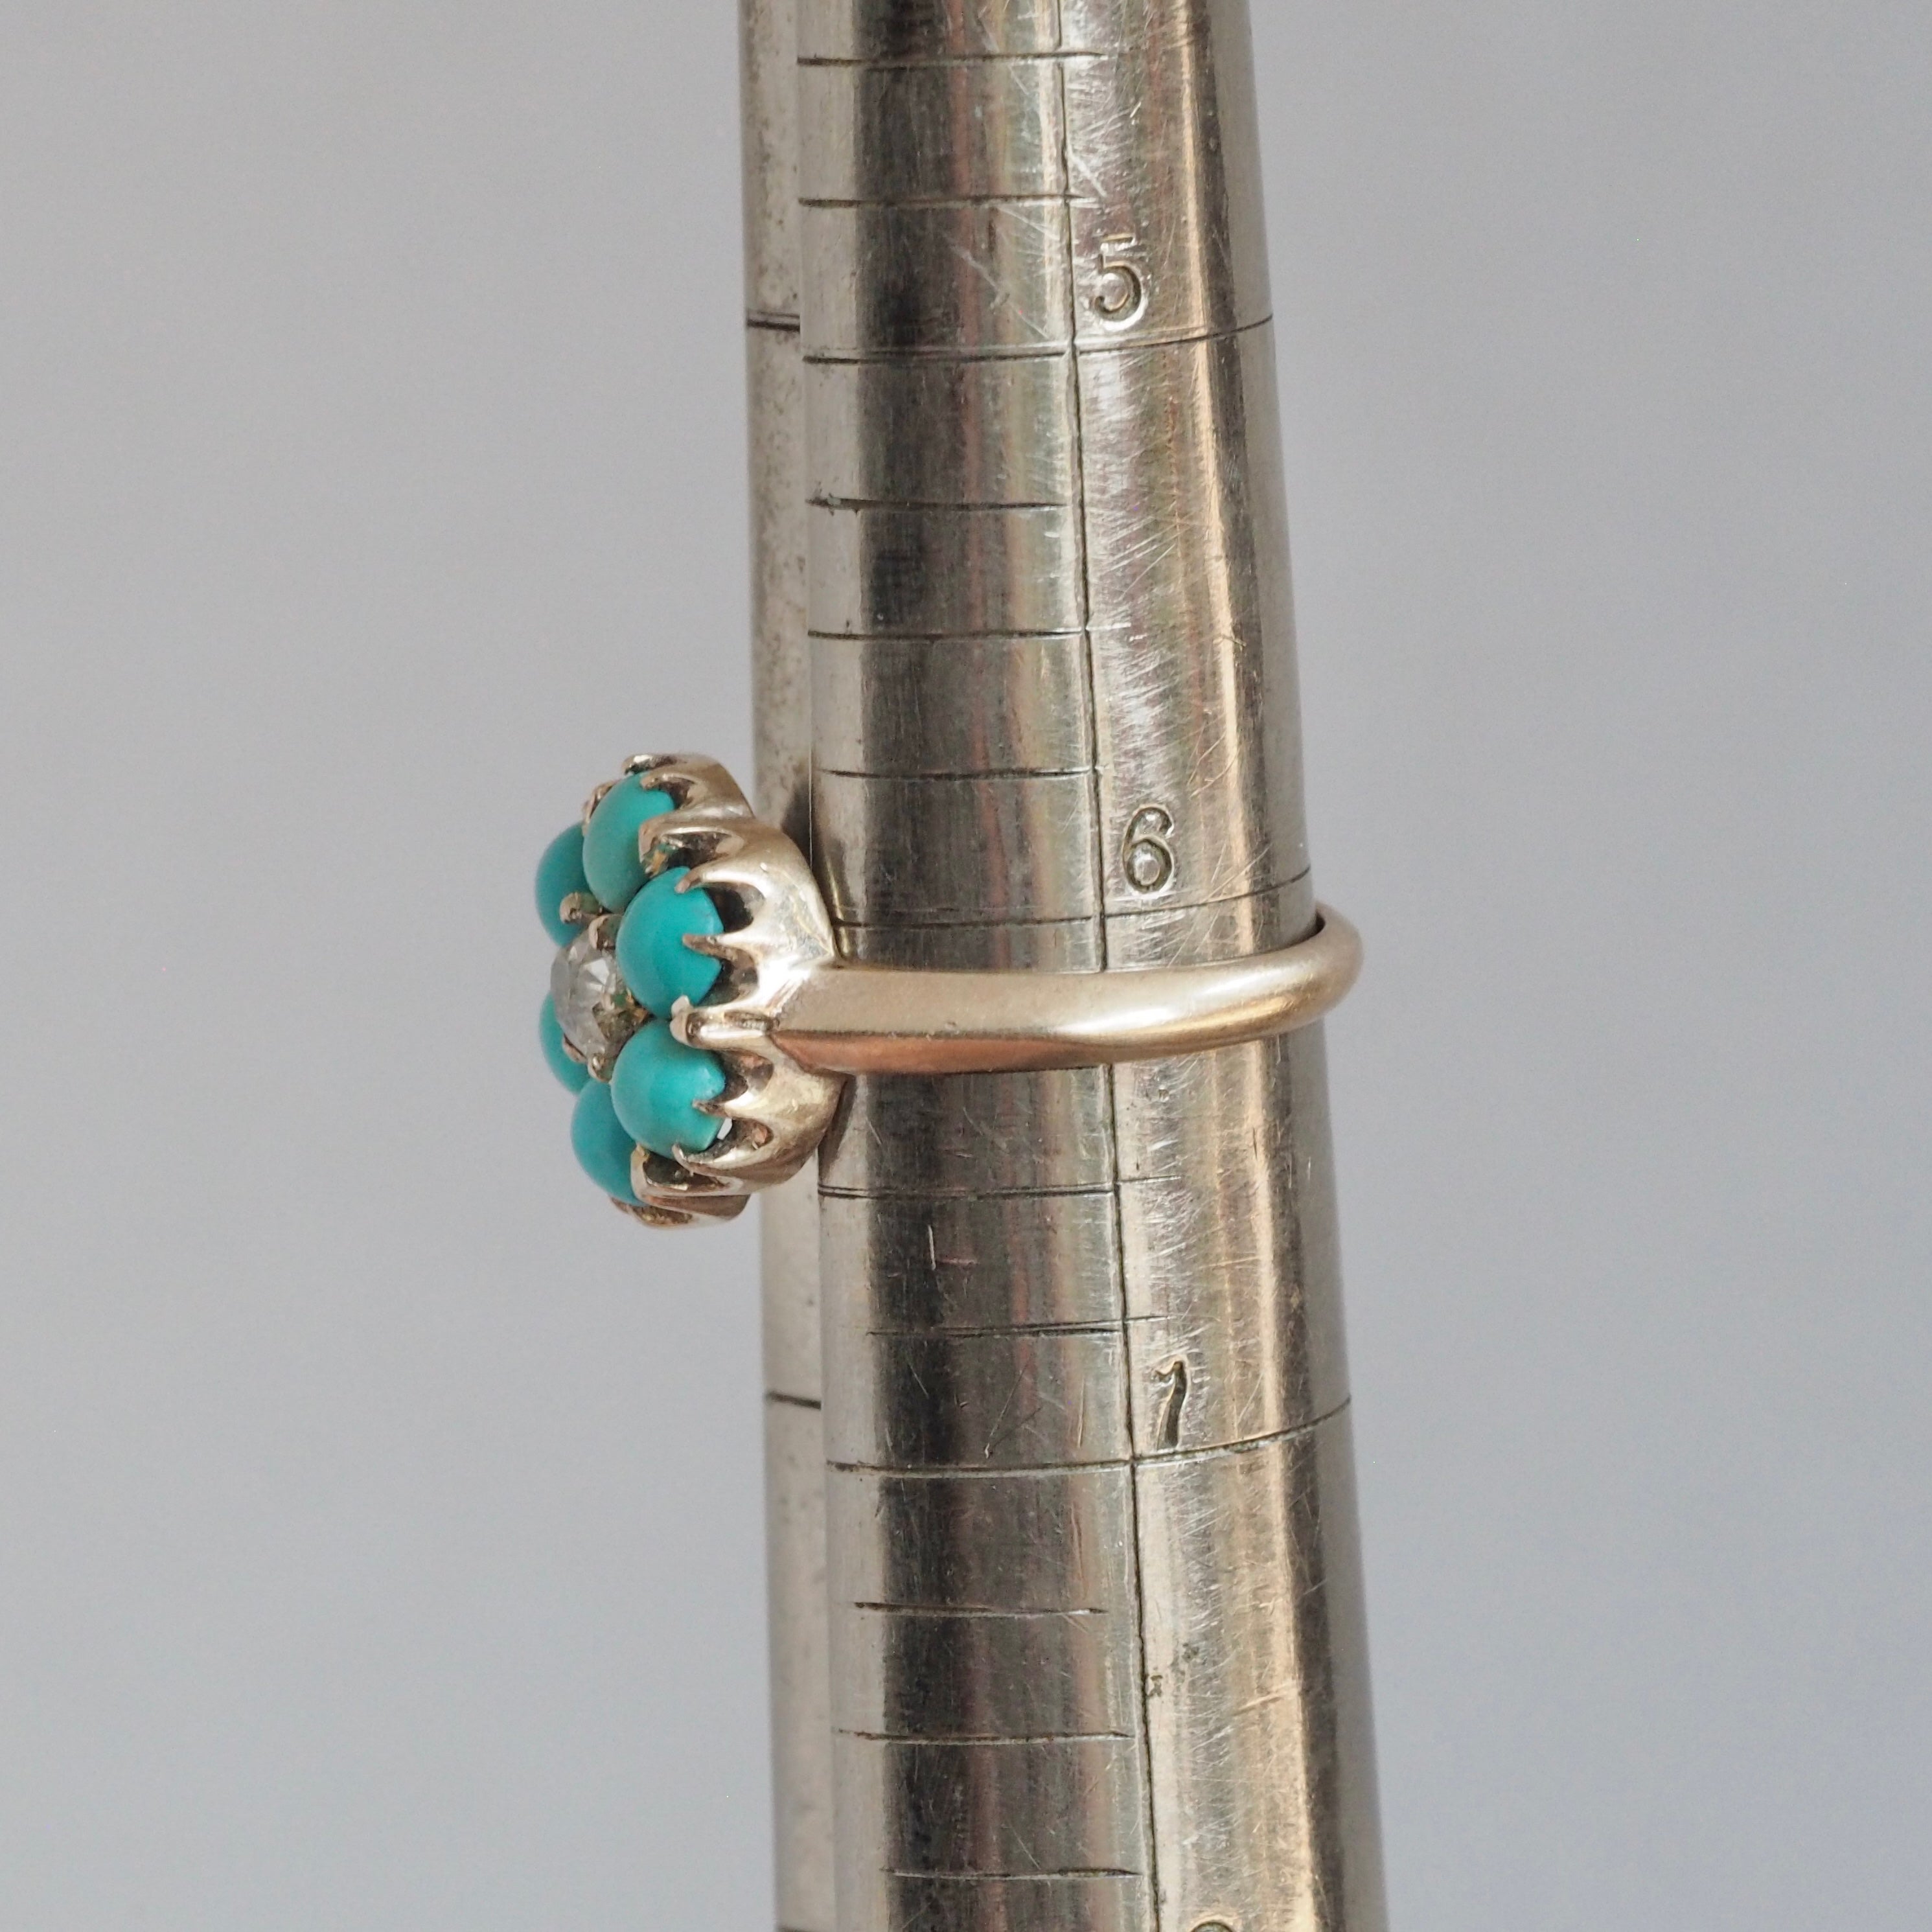 Victorian 10k Gold Turquoise and Old Mine Cut Diamond Flower Ring